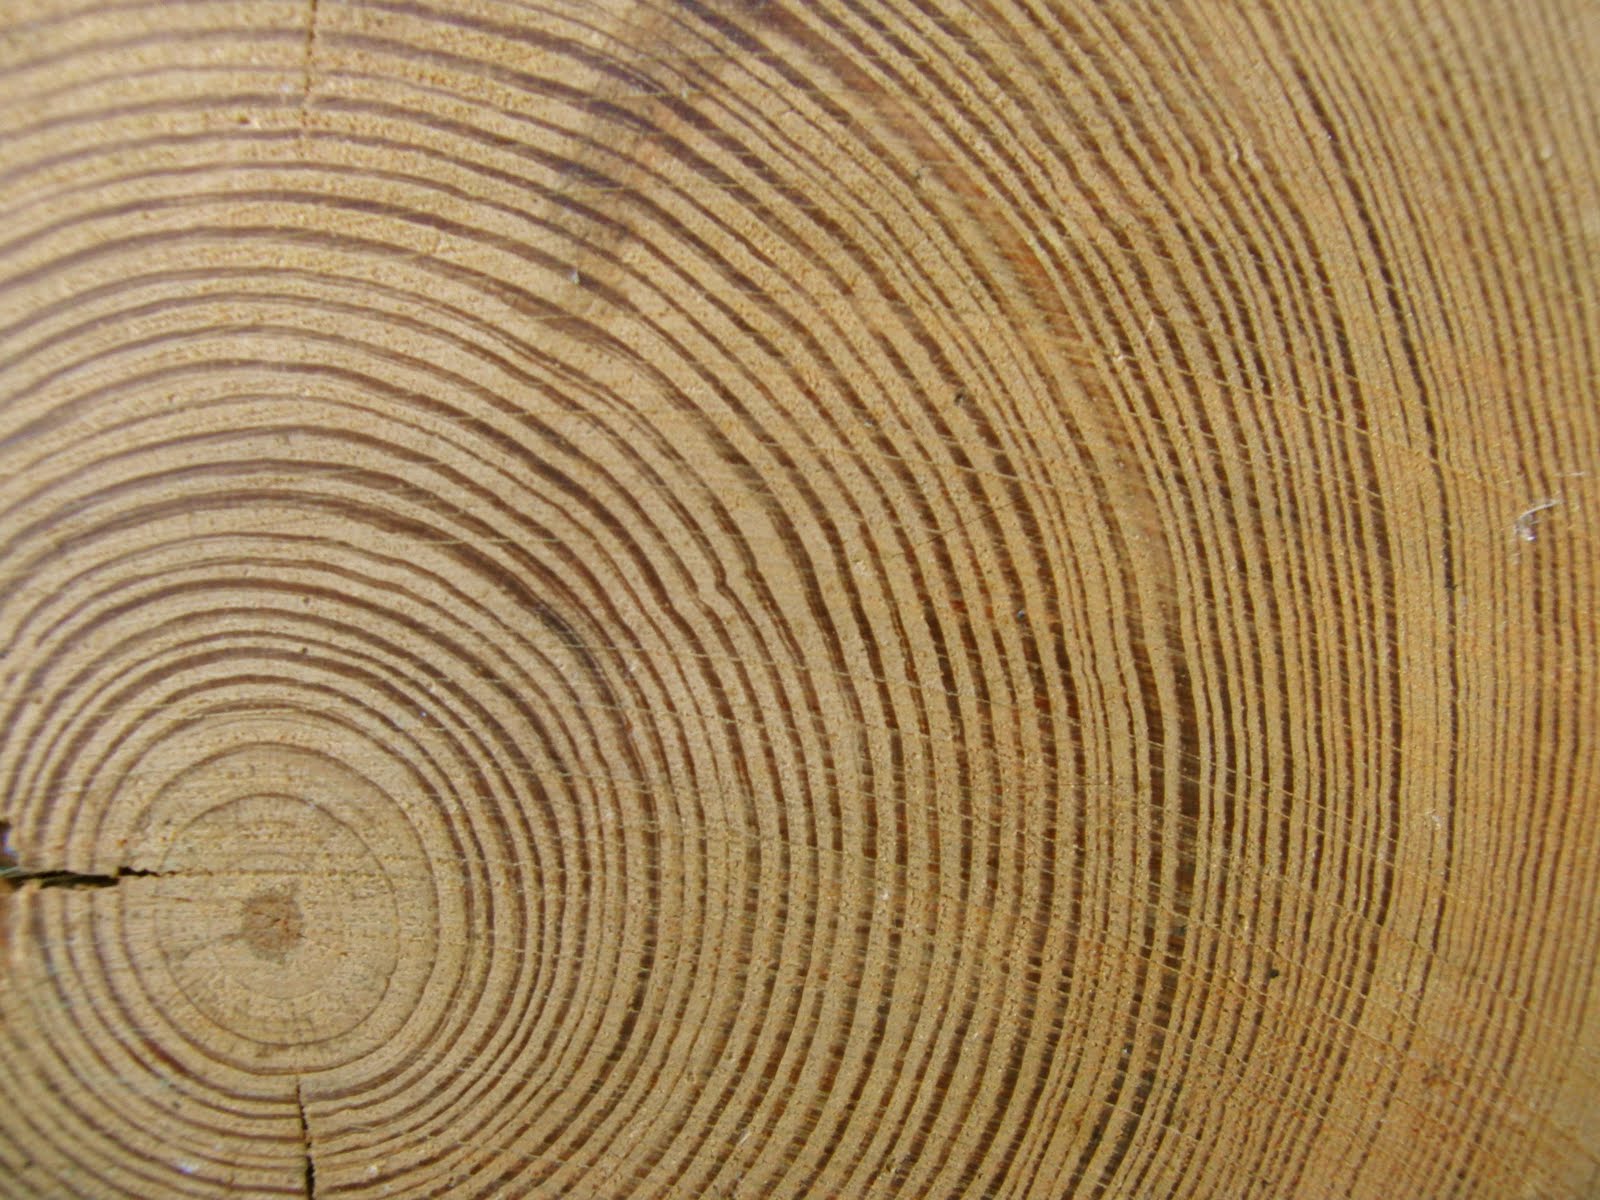 Spasms of Accommodation: Tree Rings